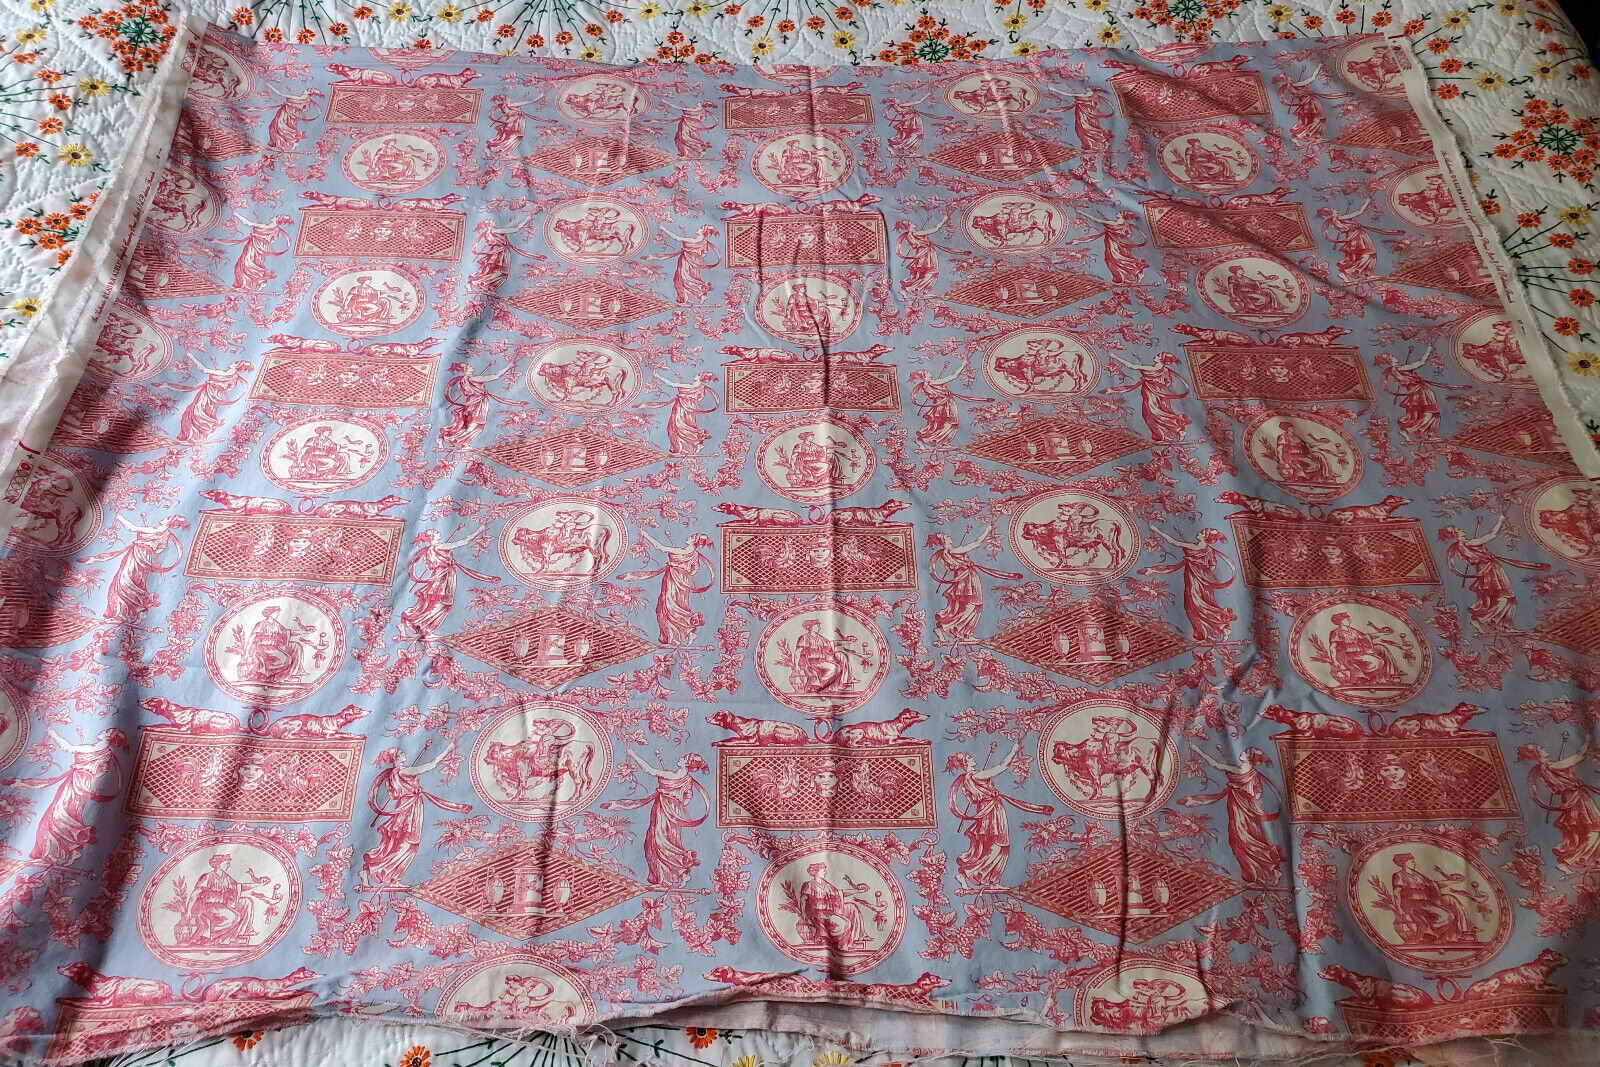 Vintage Laura Ashley English Country Print TOILE Fabric Length 2.5 yards